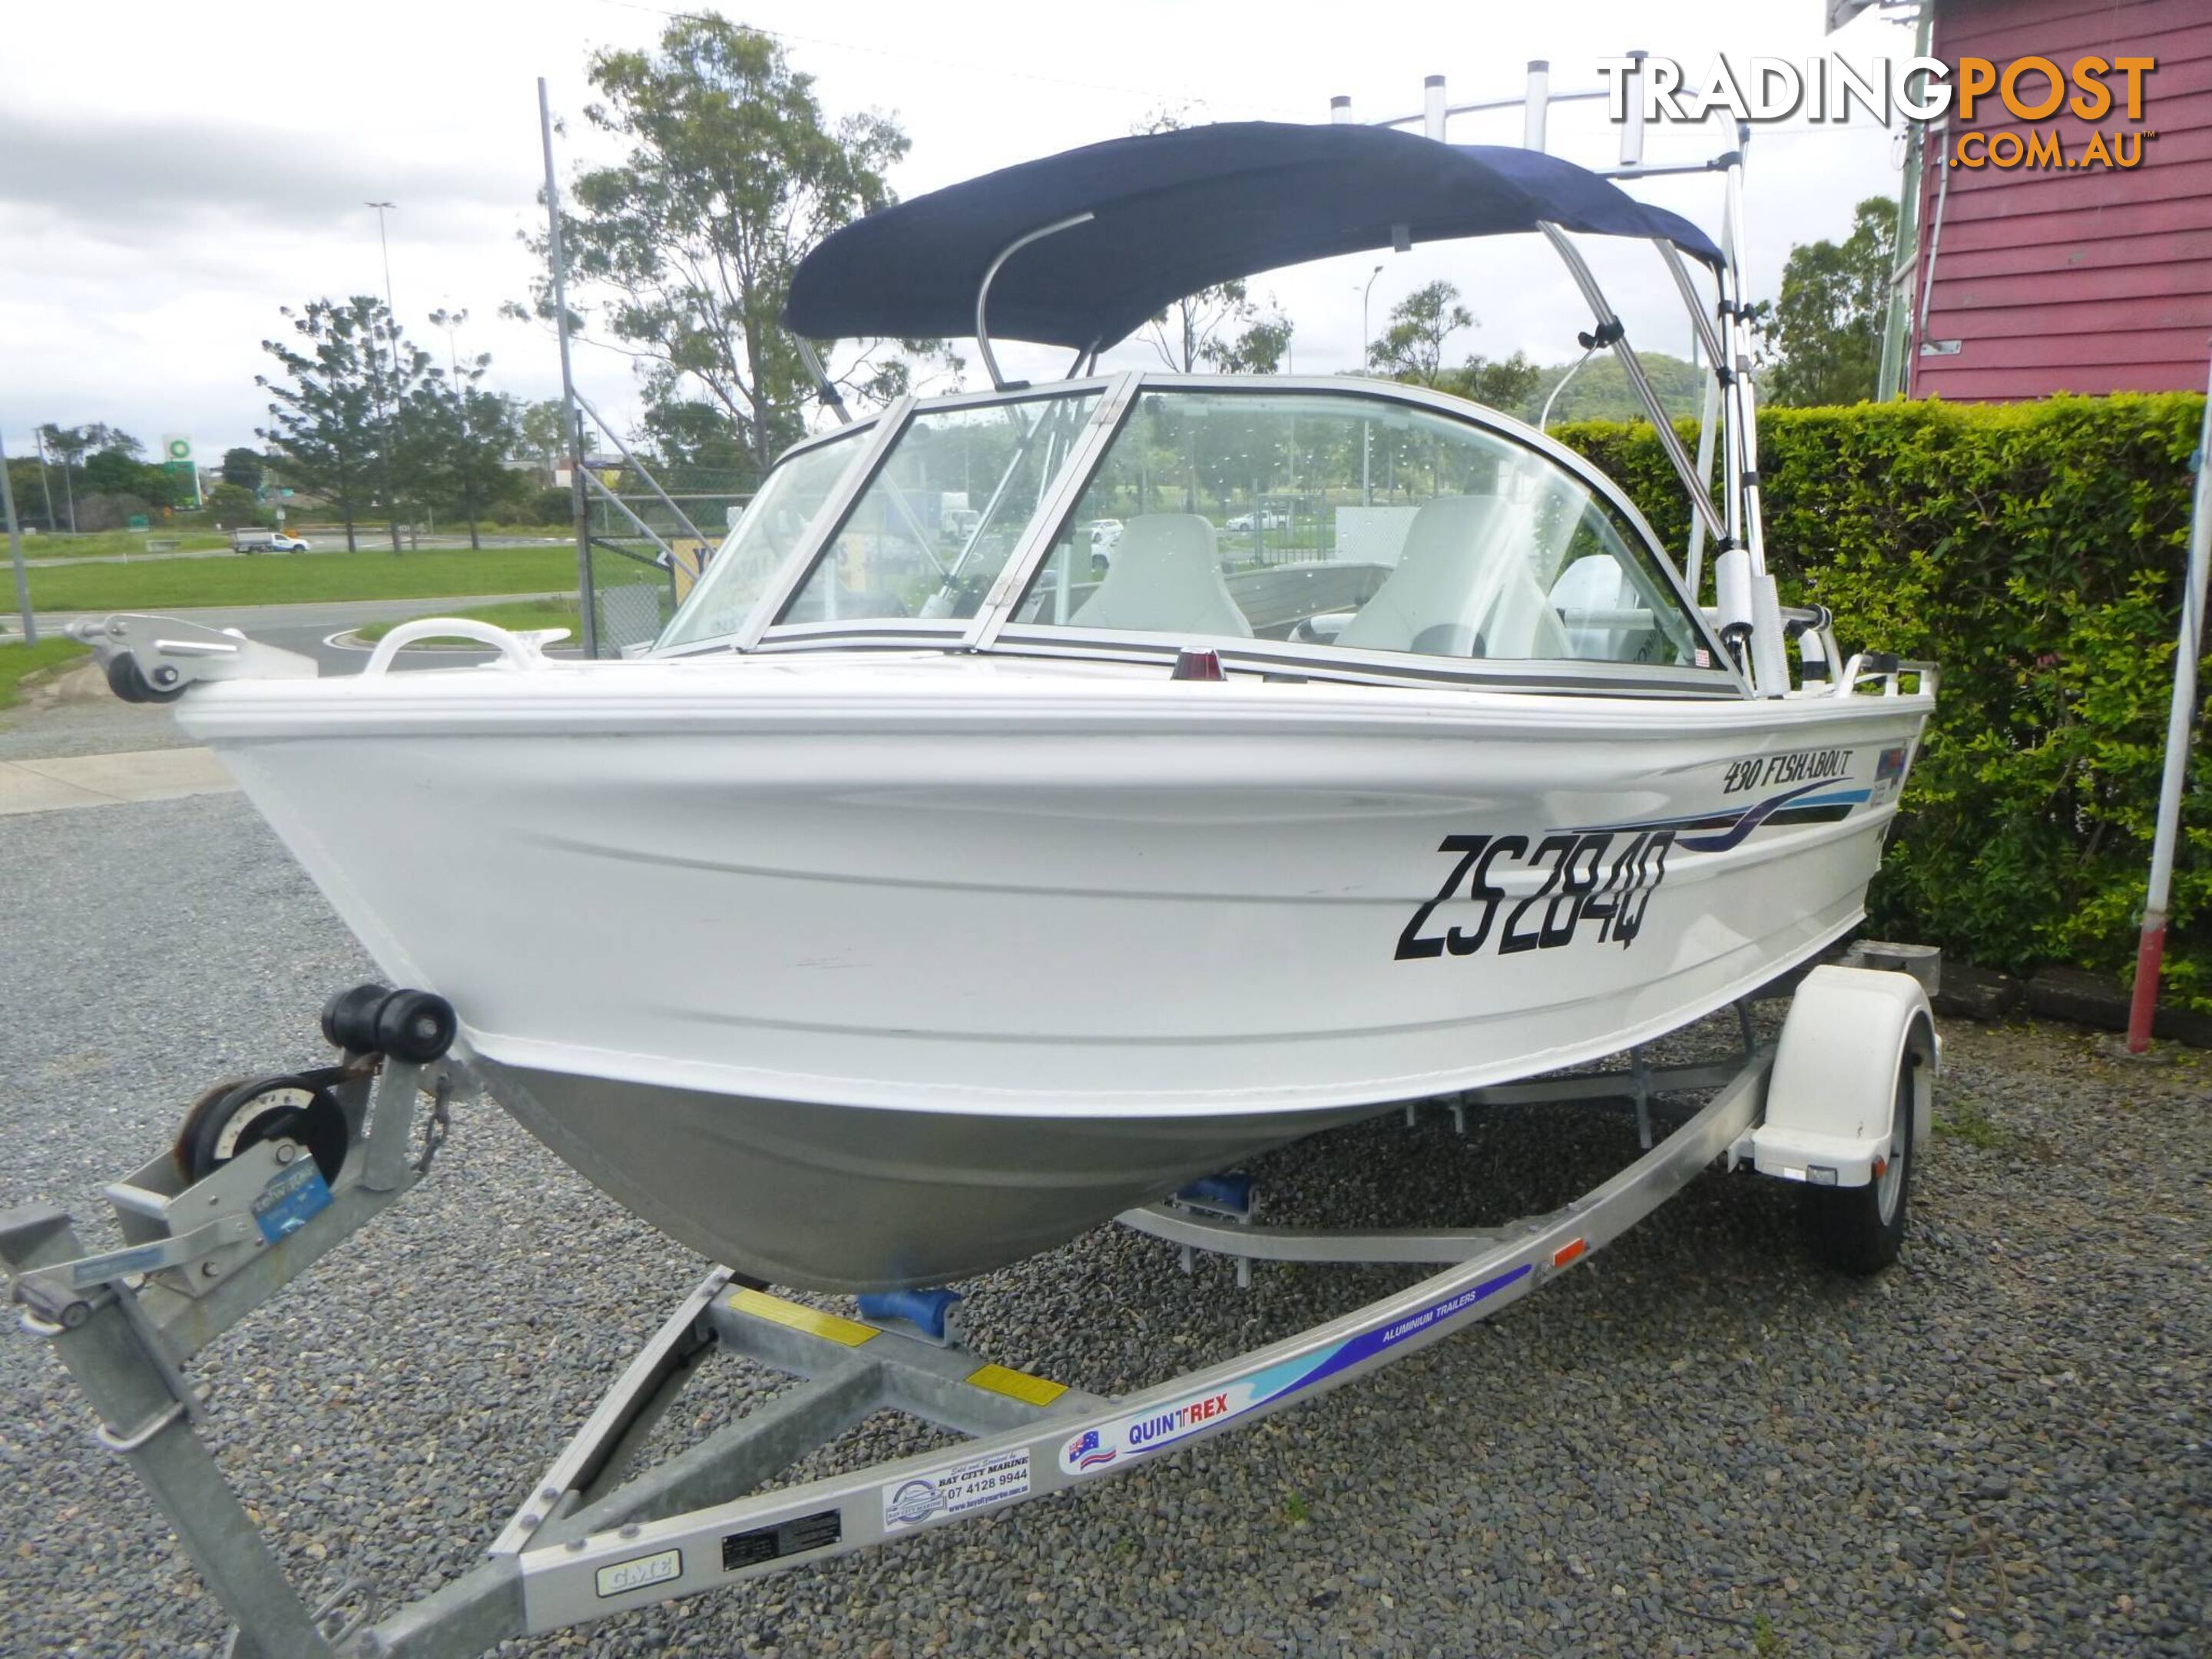 QUINTREX 430 FISHABOUT -40HP HONDA 4 STROKE AND ALLOY TRAILER